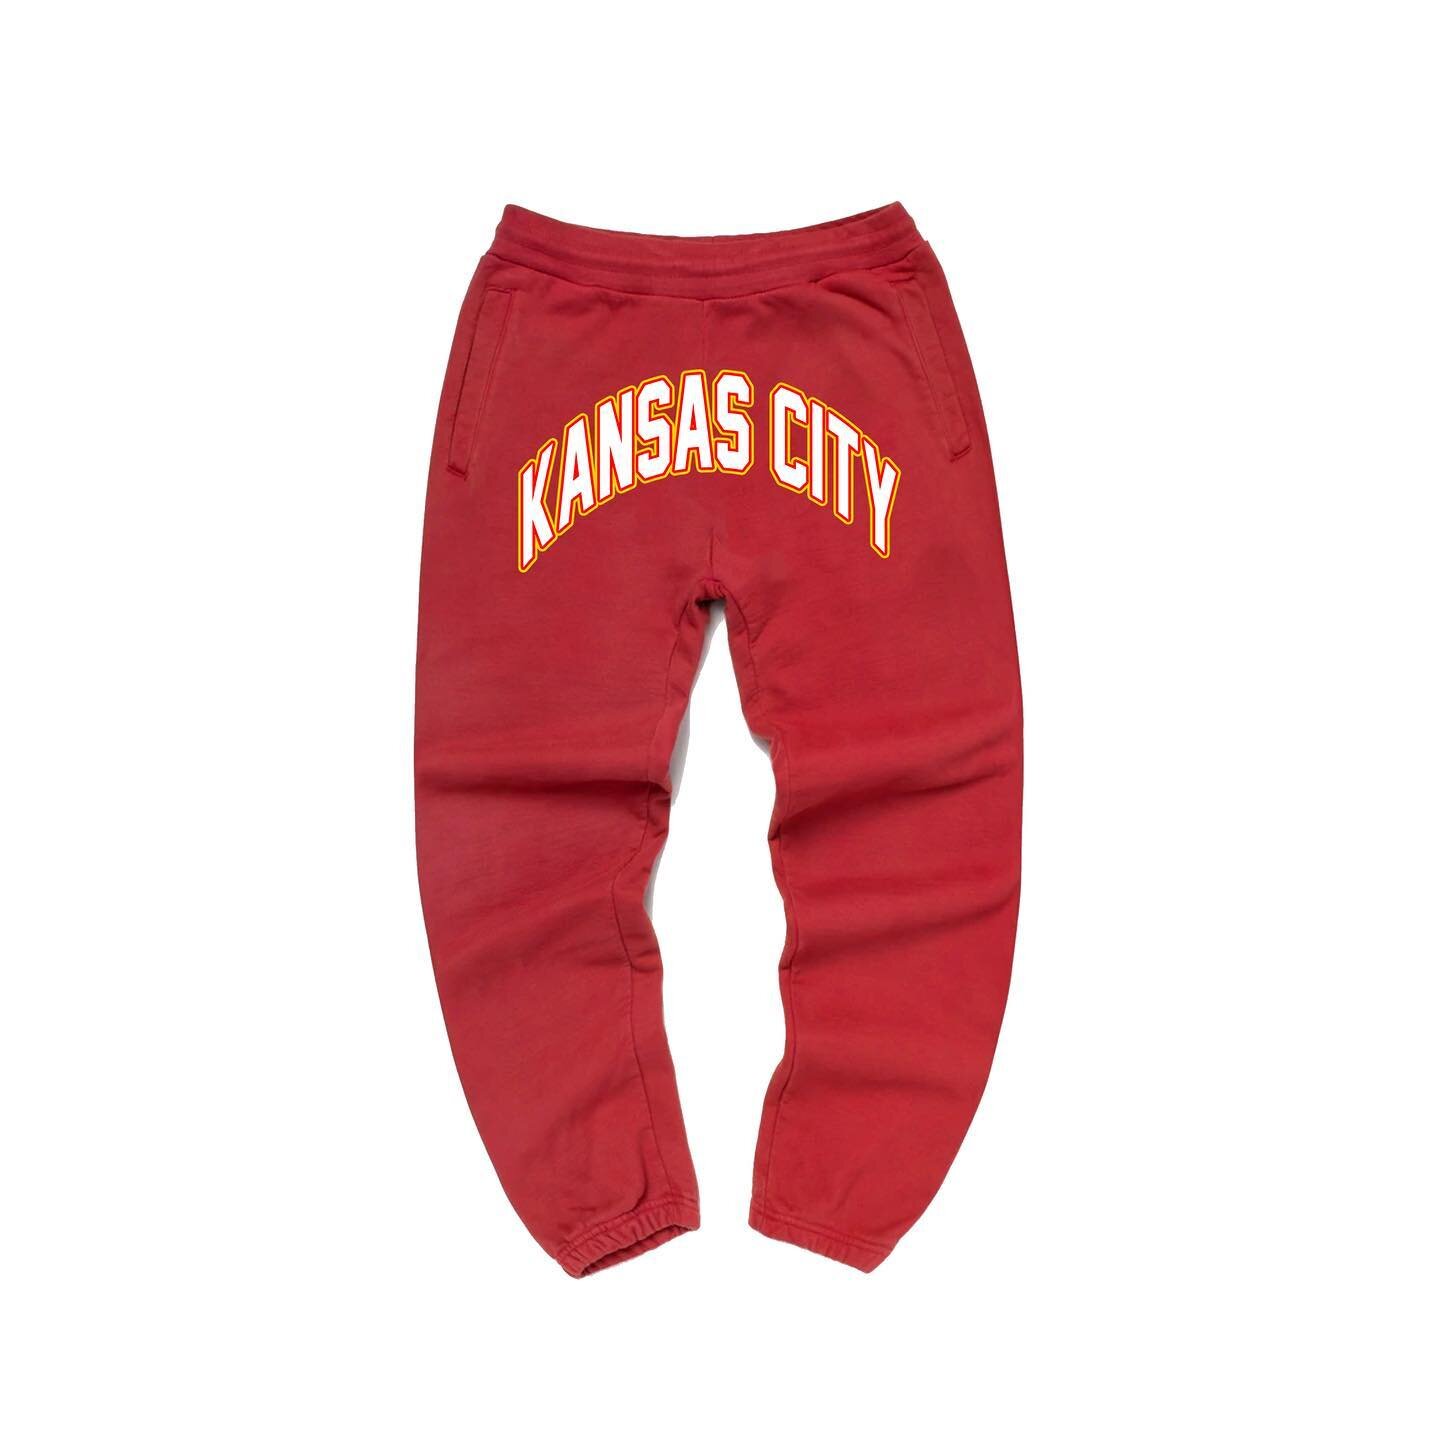 Kansas City sweatpants are available now! Will only be available for the next 72 hours, so get them before they&rsquo;re gone!